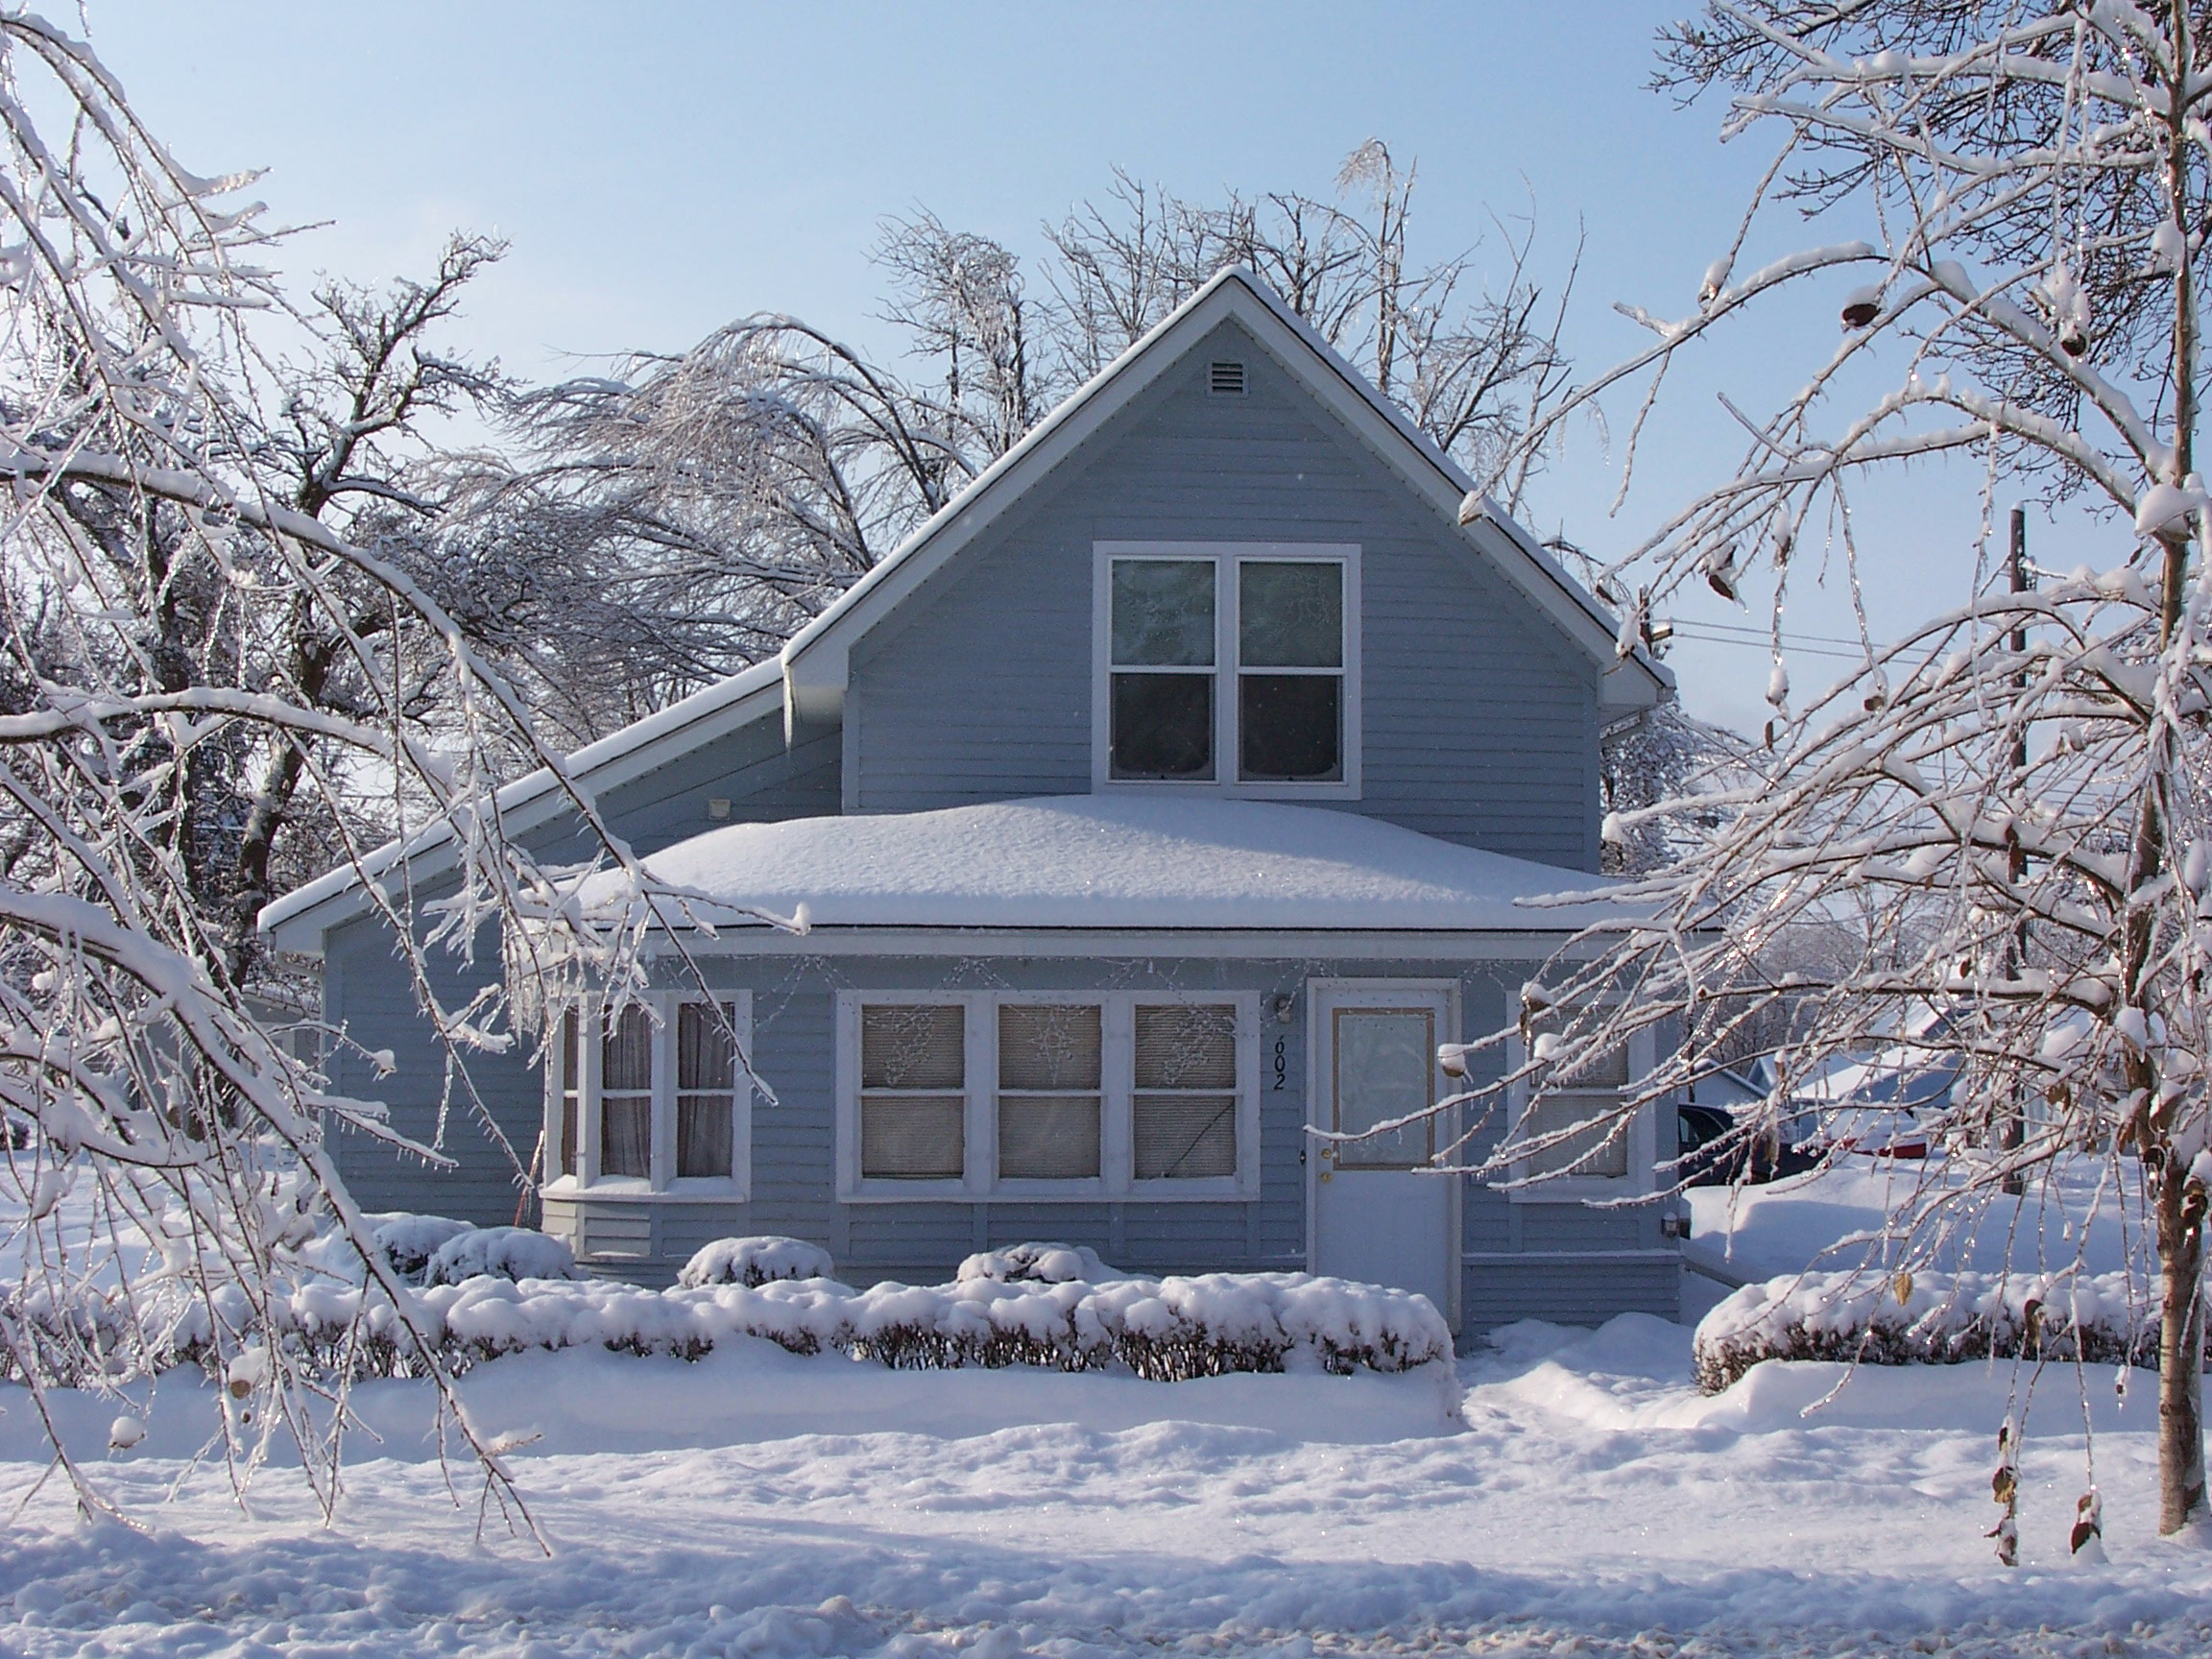 6 Ways to Prepare for a Snow Storm